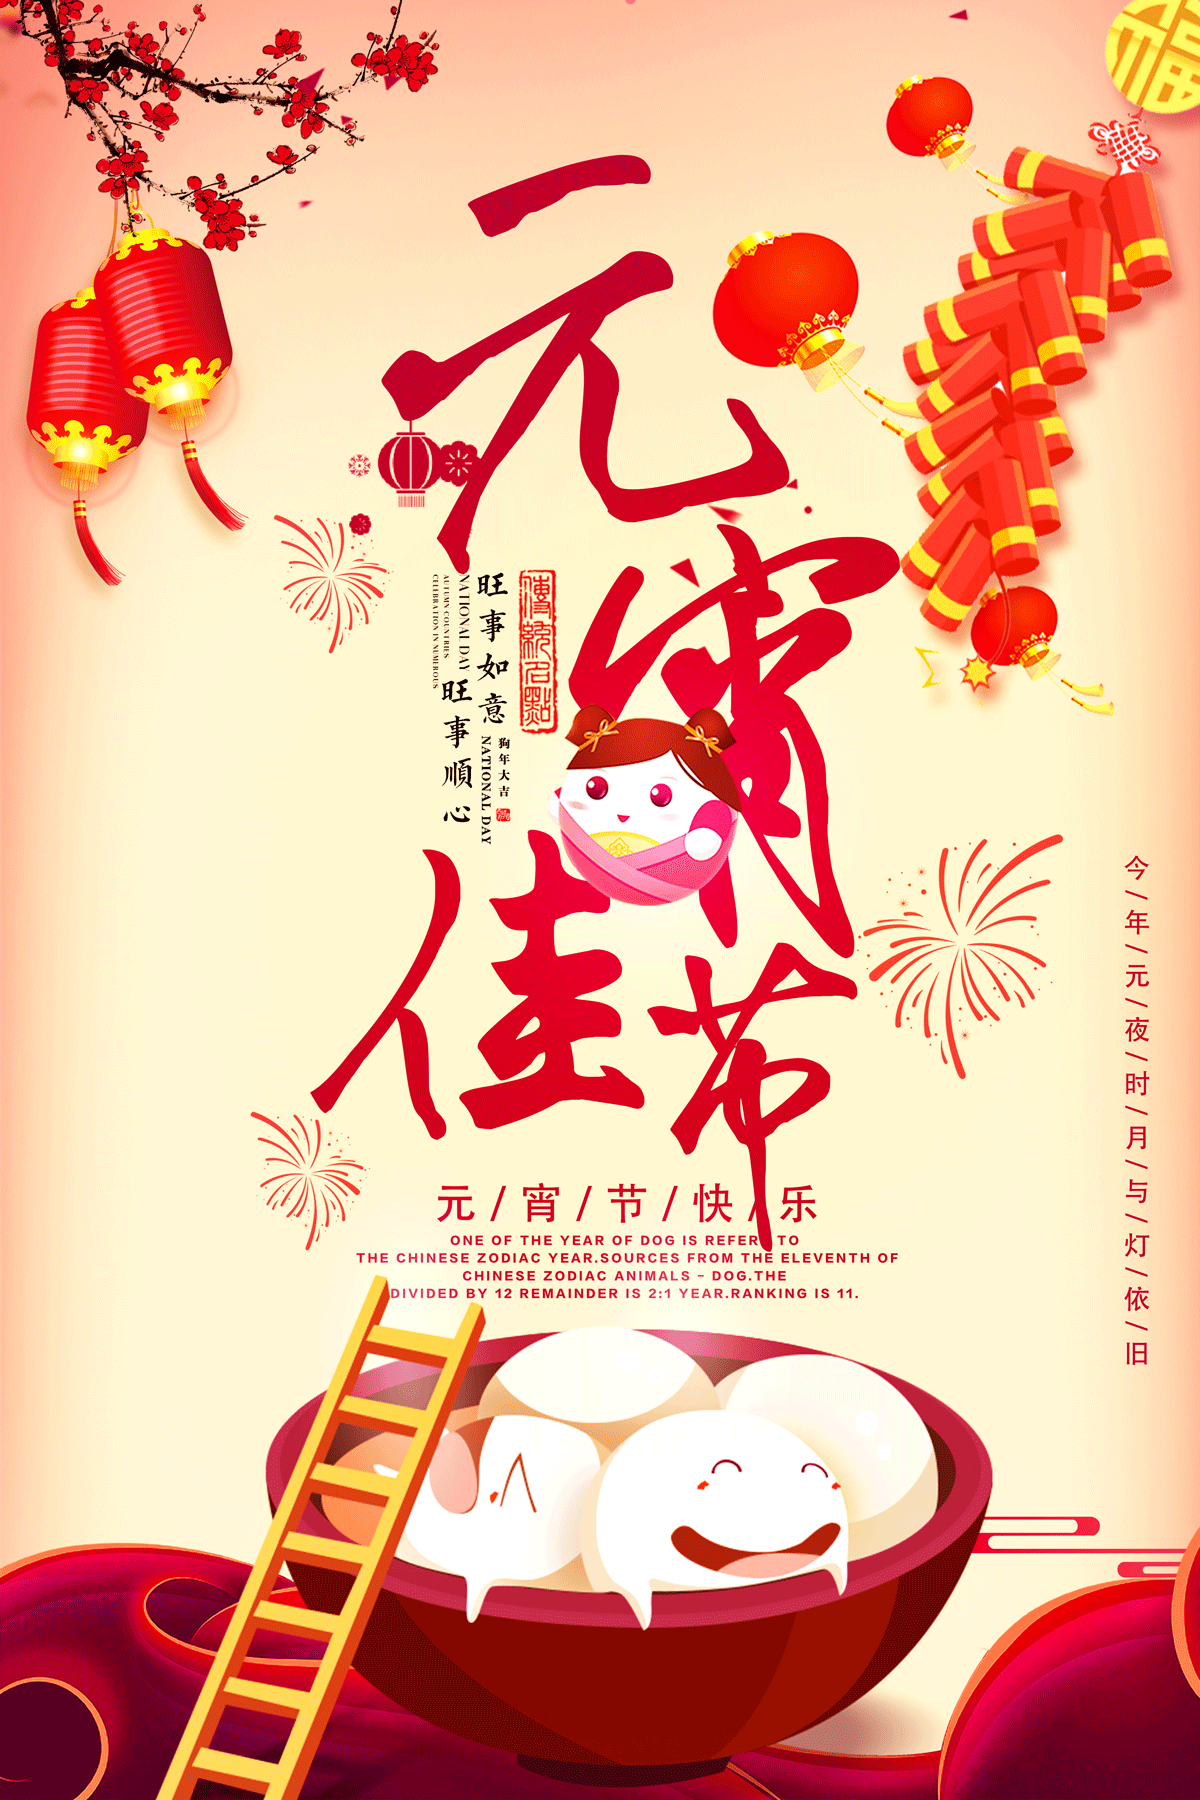 China's Lantern Festival poster in 2018. - PSD File Free Download